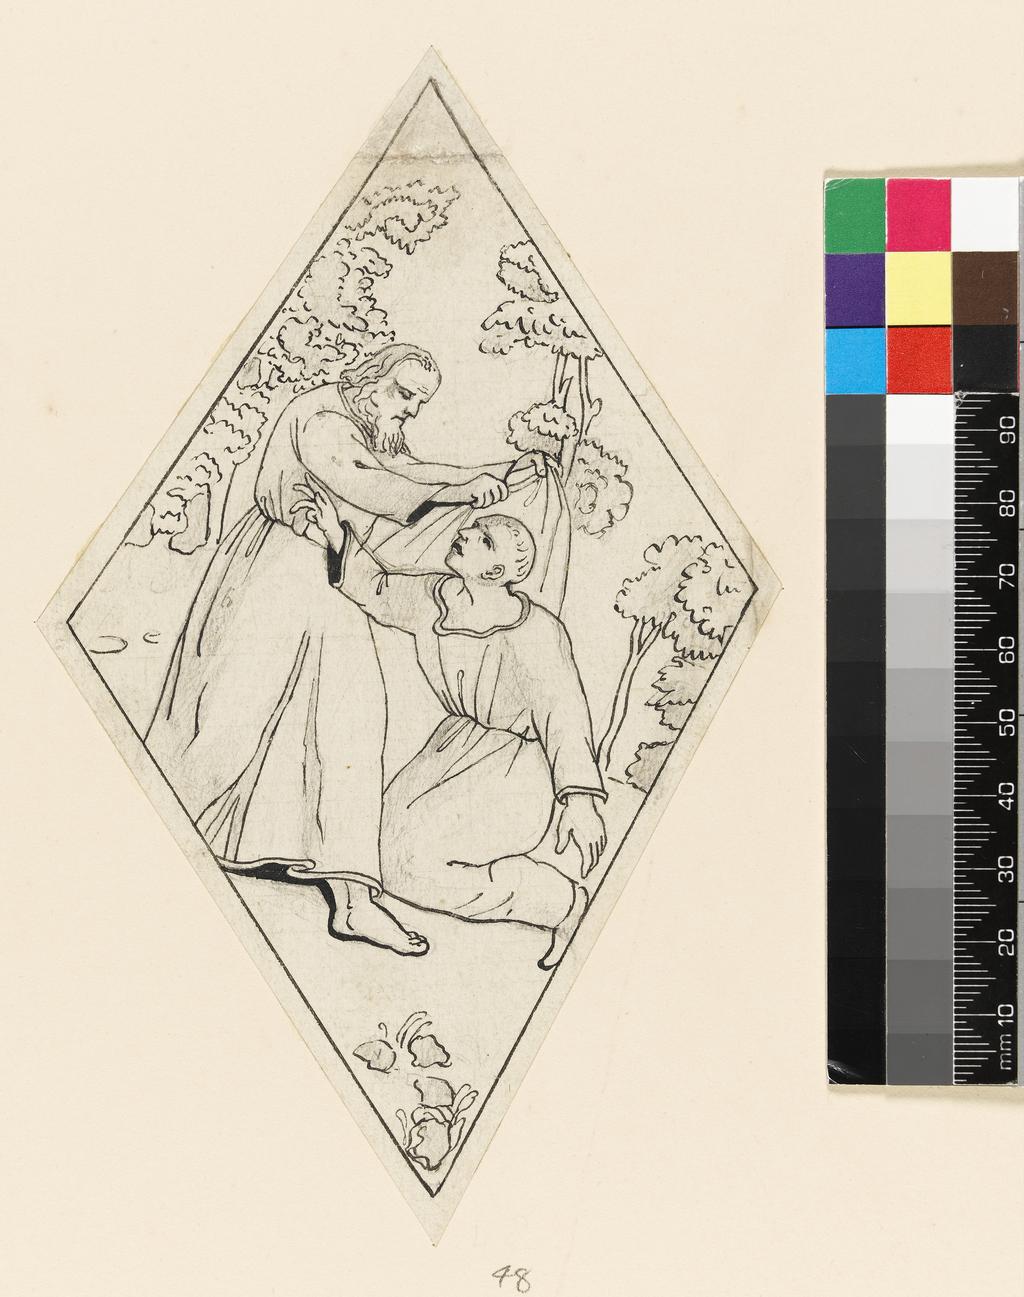 An image of Title/s: Drawing reduced from tracings taken from the inlaid marble pavement of Siena Cathedral during its restoration in the nineteenth centuryTitle/s: Design for a lozenge: Elijah casting his mantle on Elisha Maker/s: Maccari, Leopoldo (draughtsman) [ULAN info: Italian artist, 1850-1894?]Technique Description: pen and black ink with graphite on lightly squared paper Dimensions: height: 165 mm, width: 101 mm